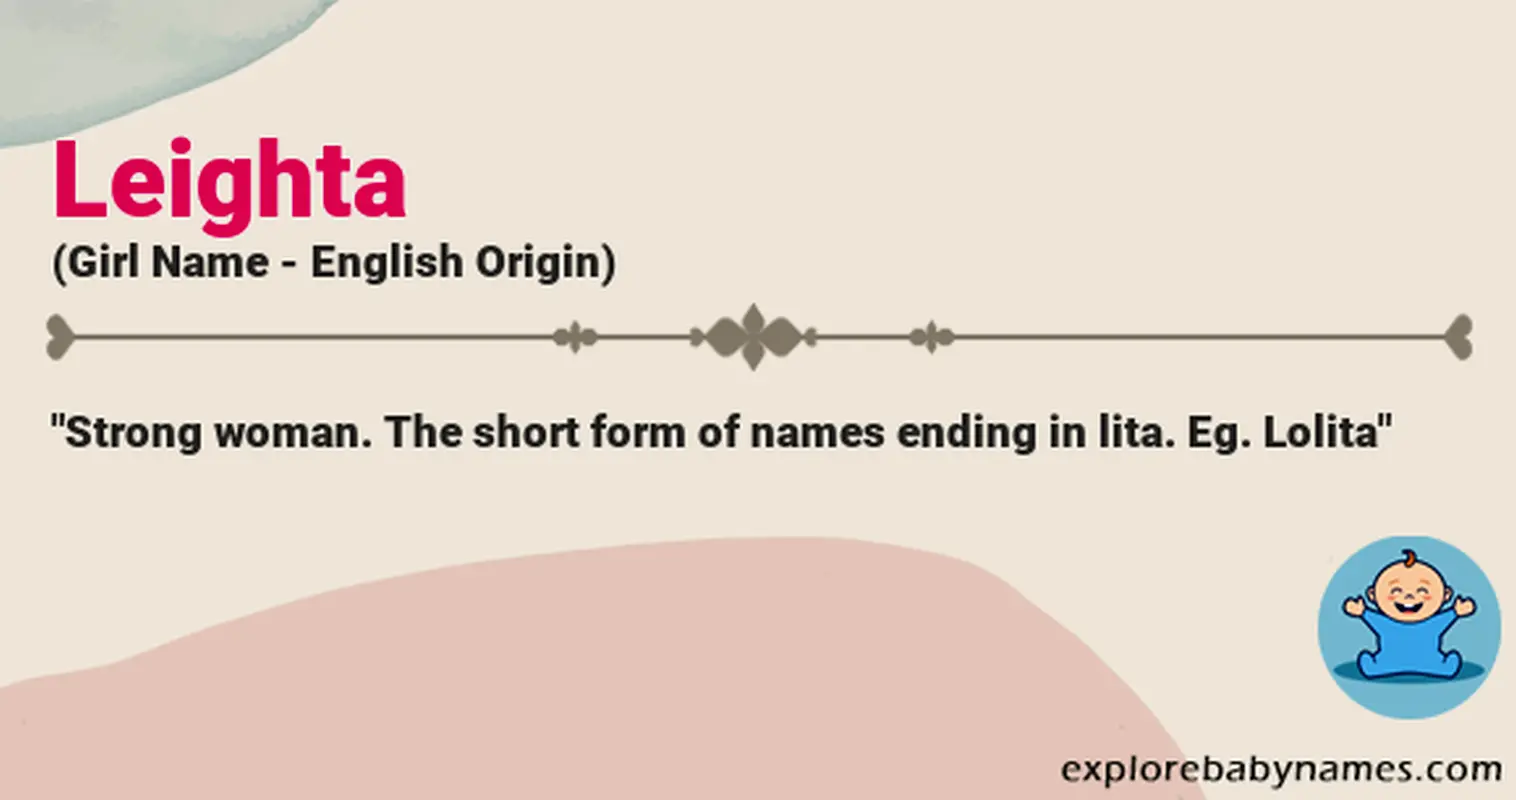 Meaning of Leighta